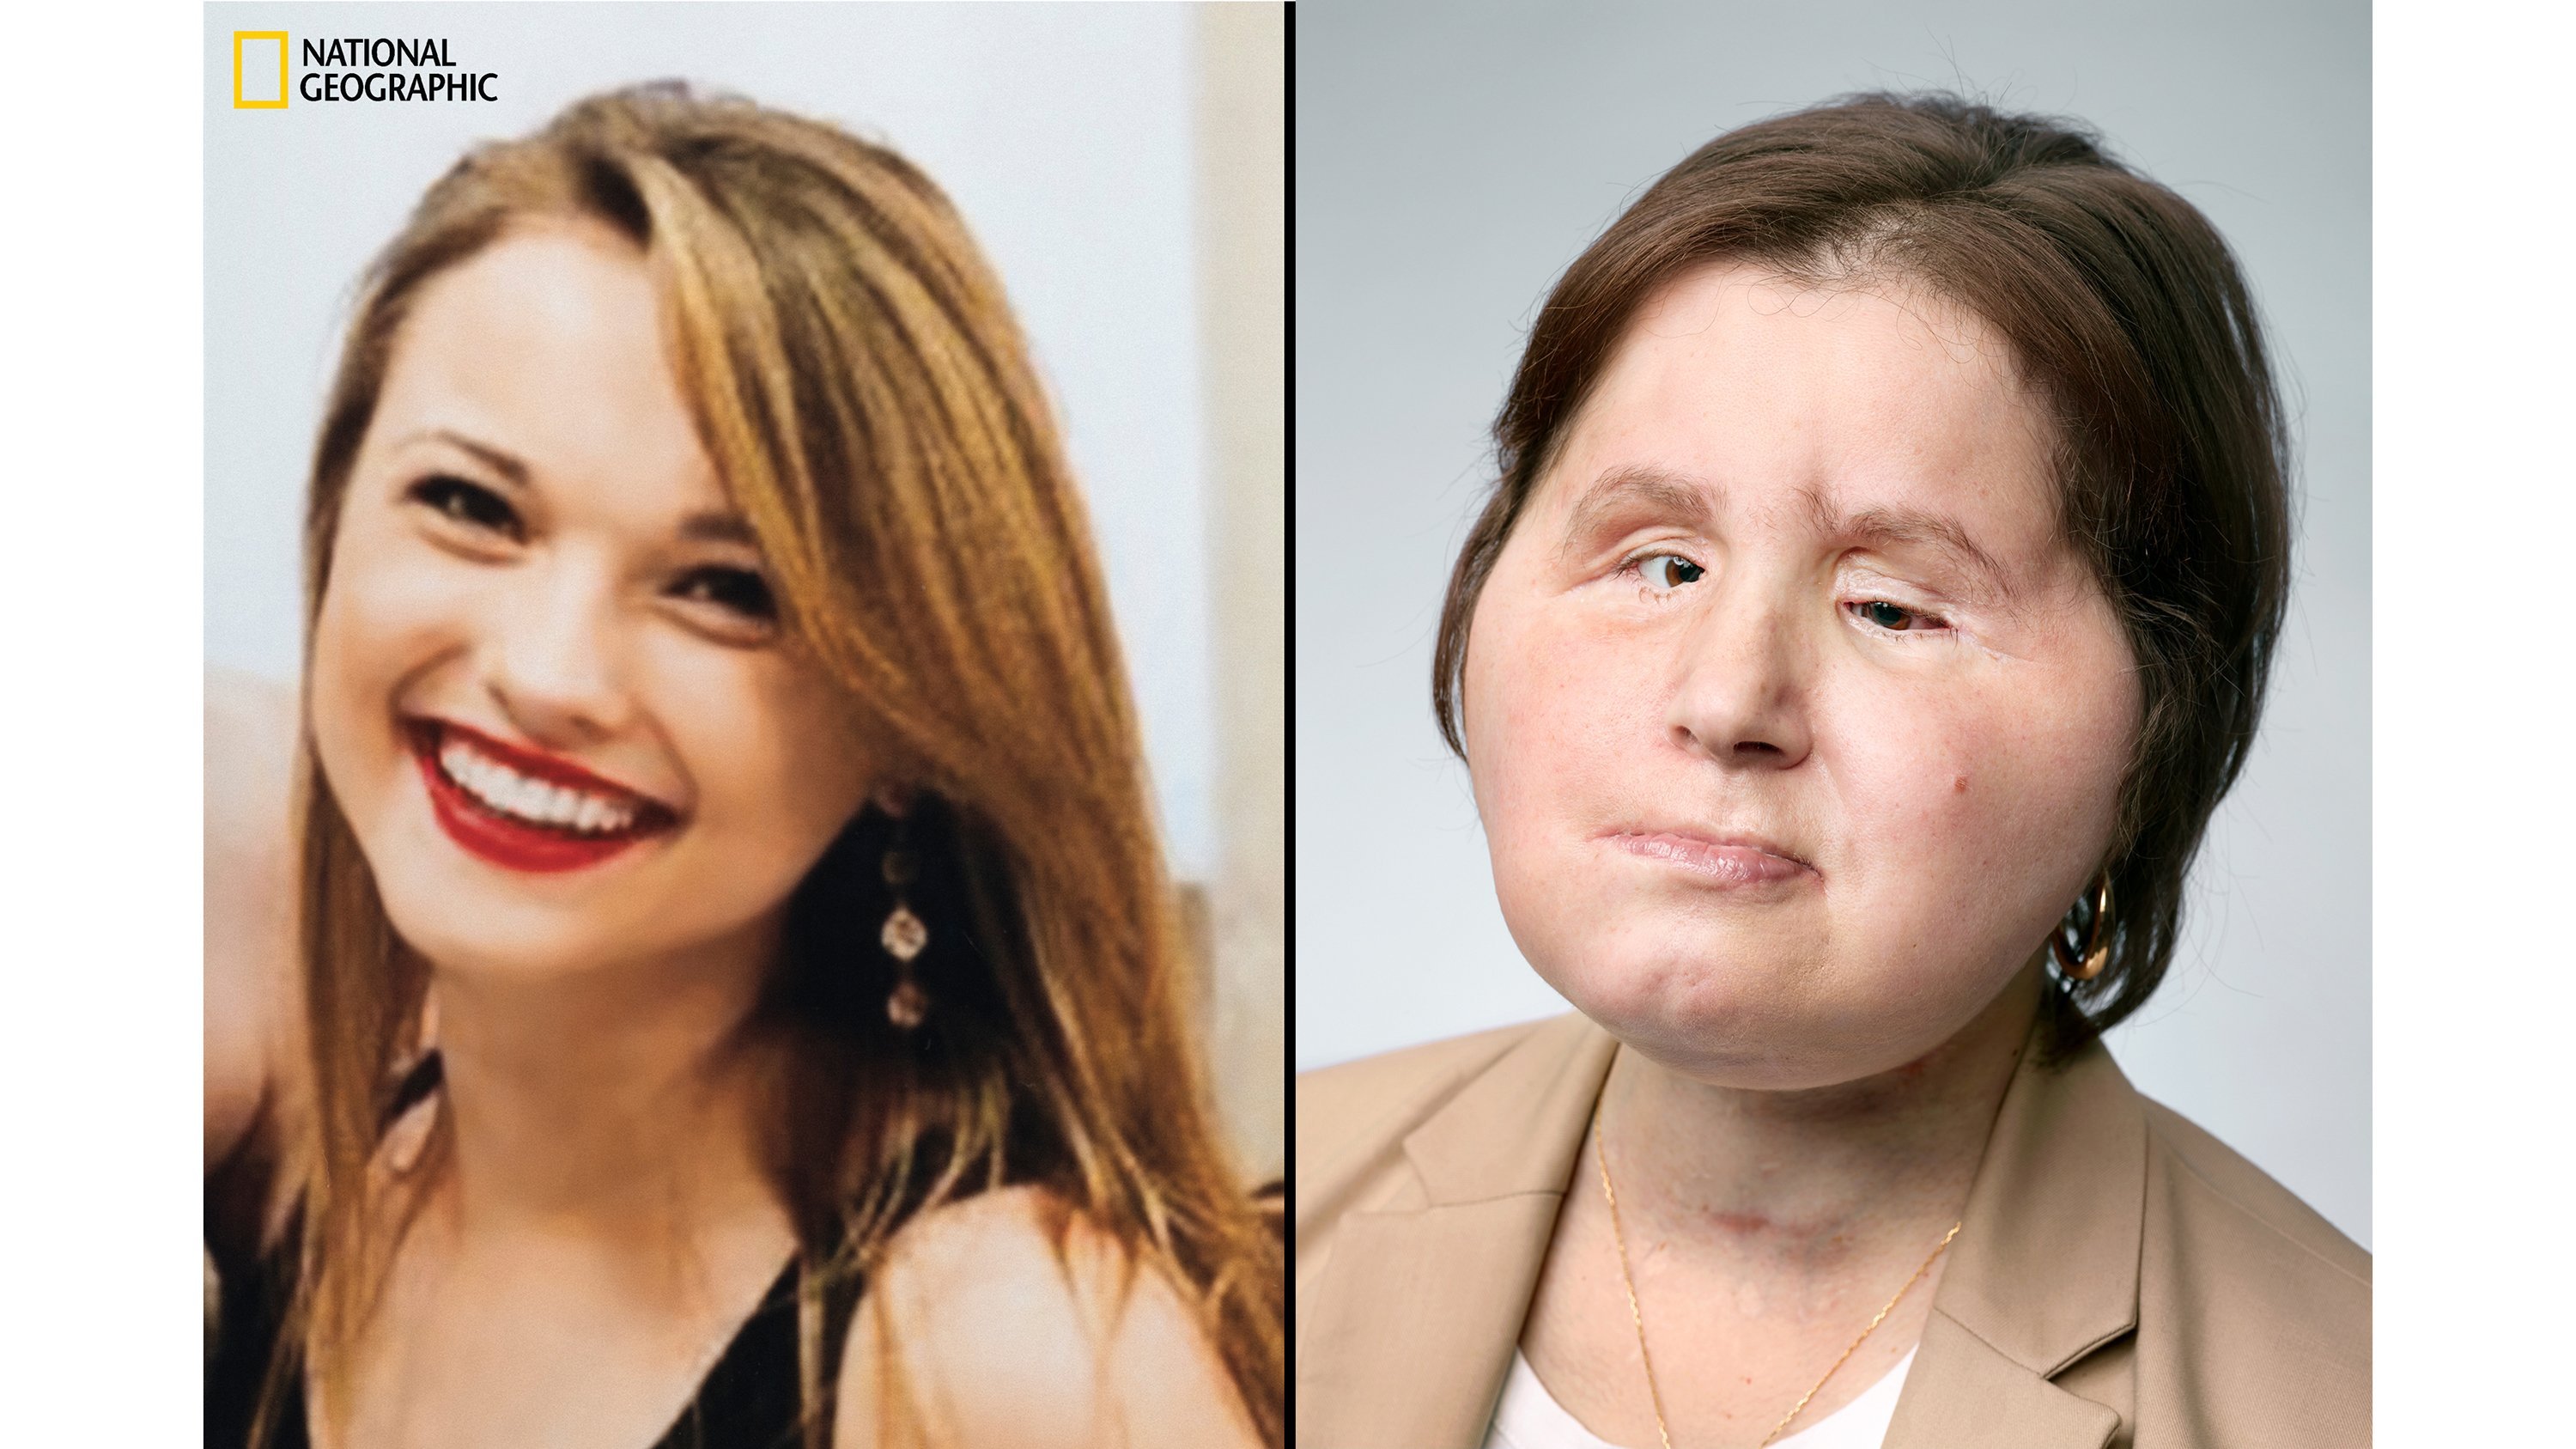 The Remarkable Saga of a Young Woman's Face Transplant